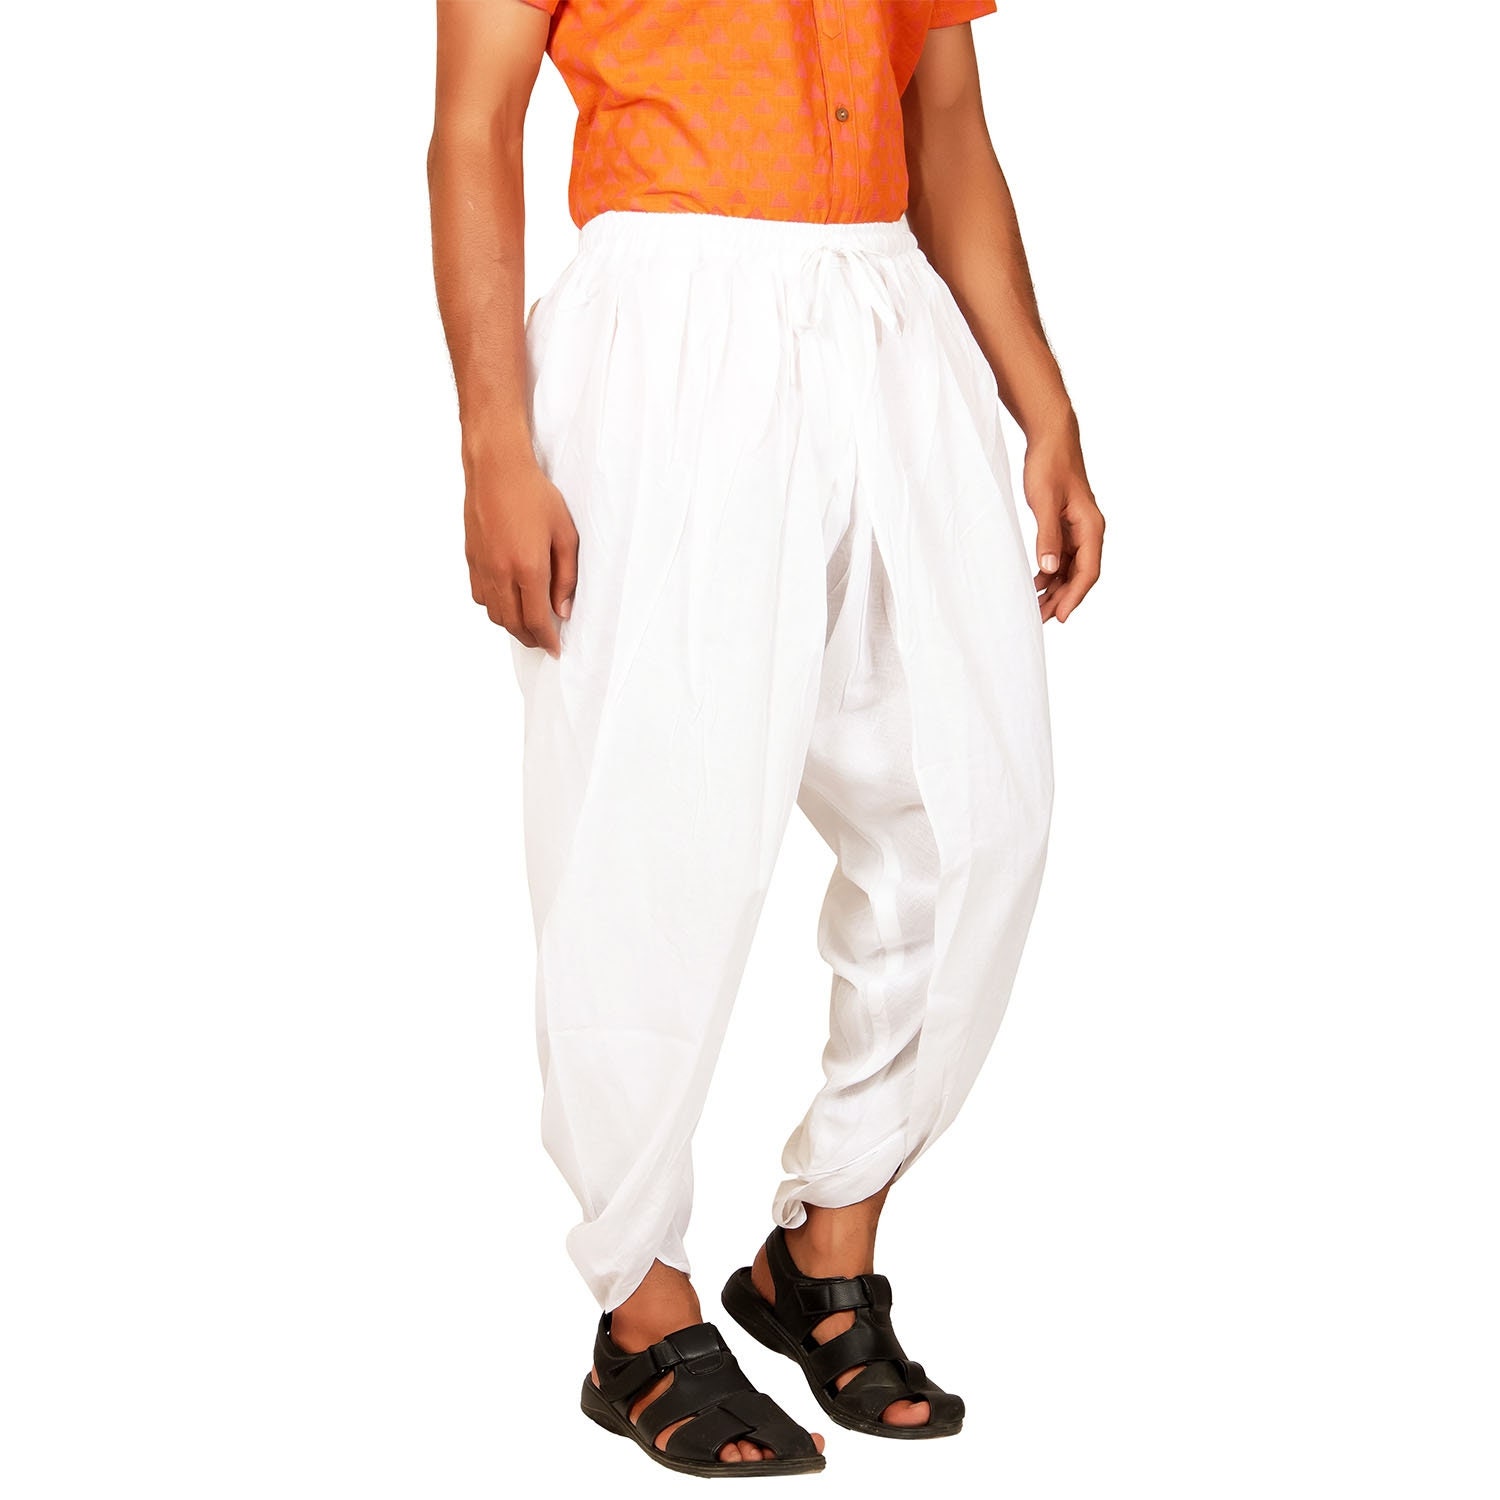 Buy Ultimate Yoga Trousers Dhoti Style Fully Flexible Loom Online in India   Etsy